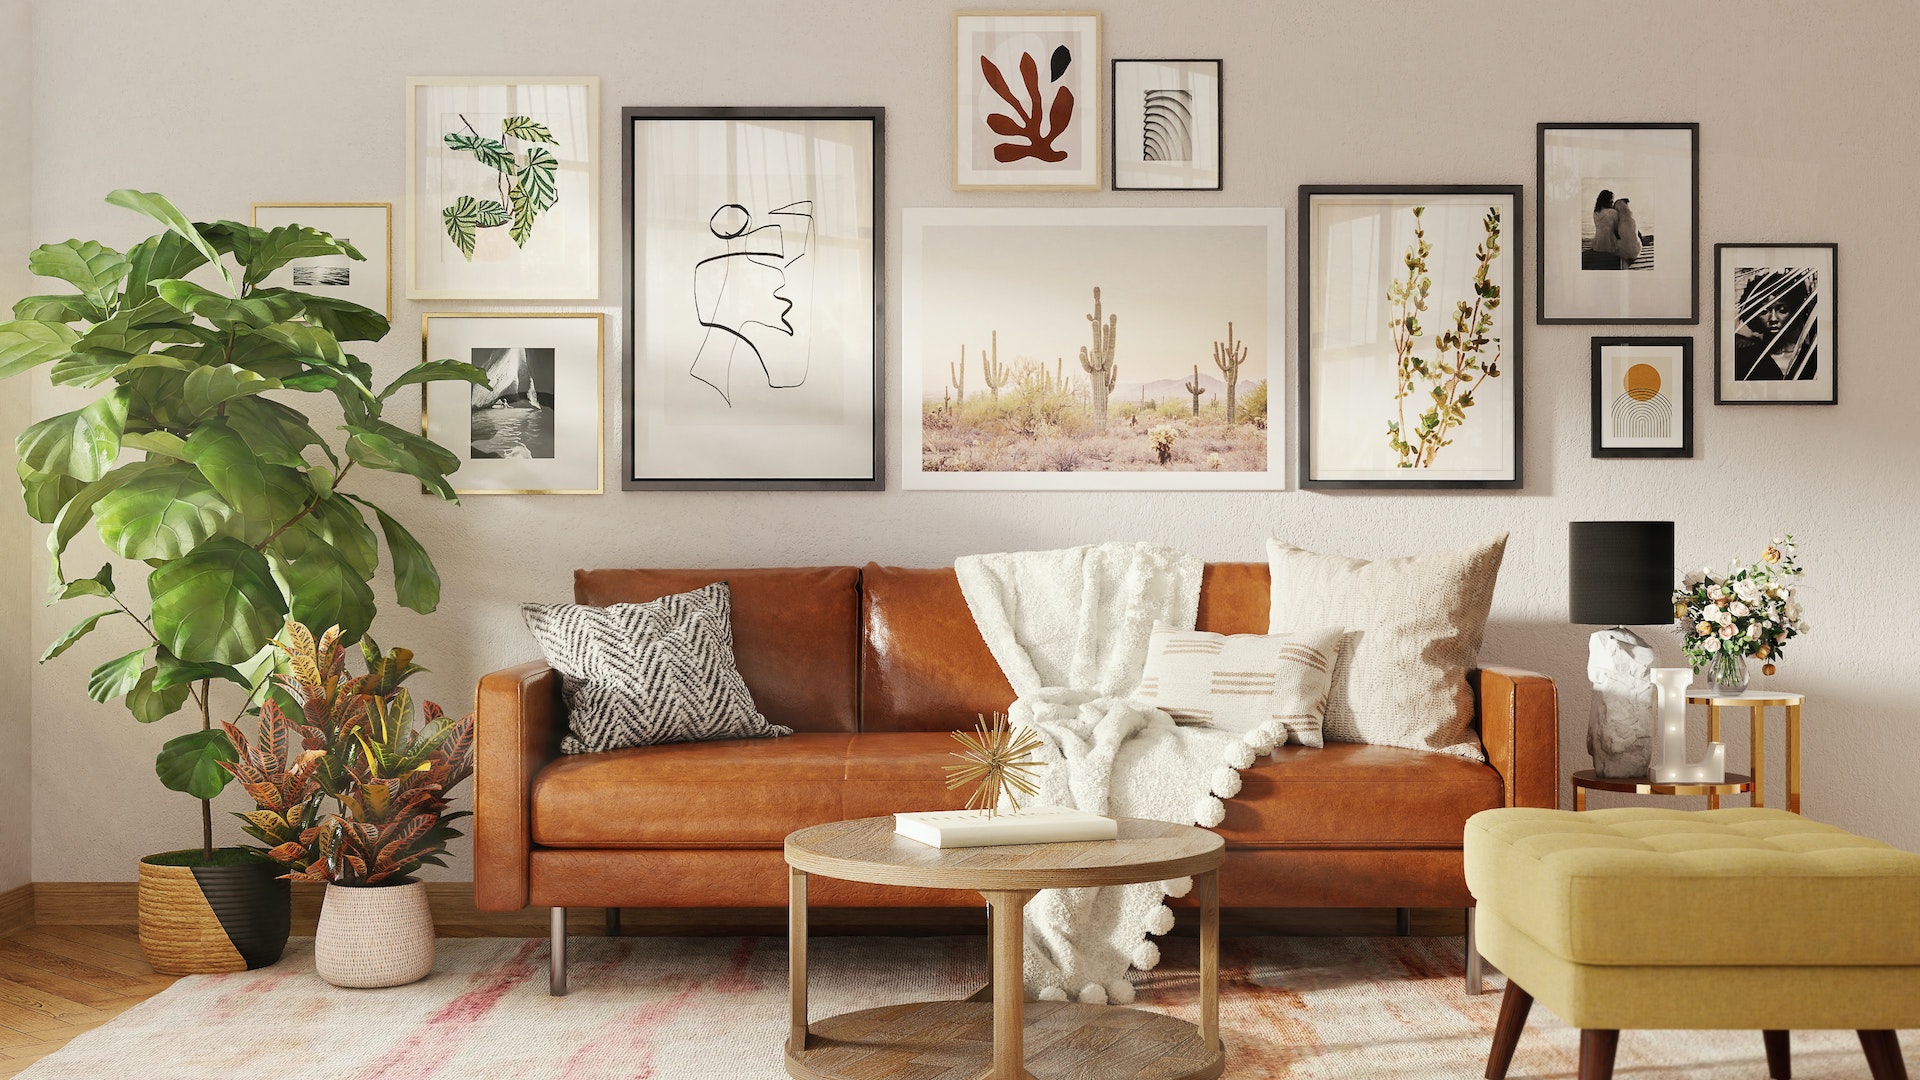 Master the art of home with these 7 tips